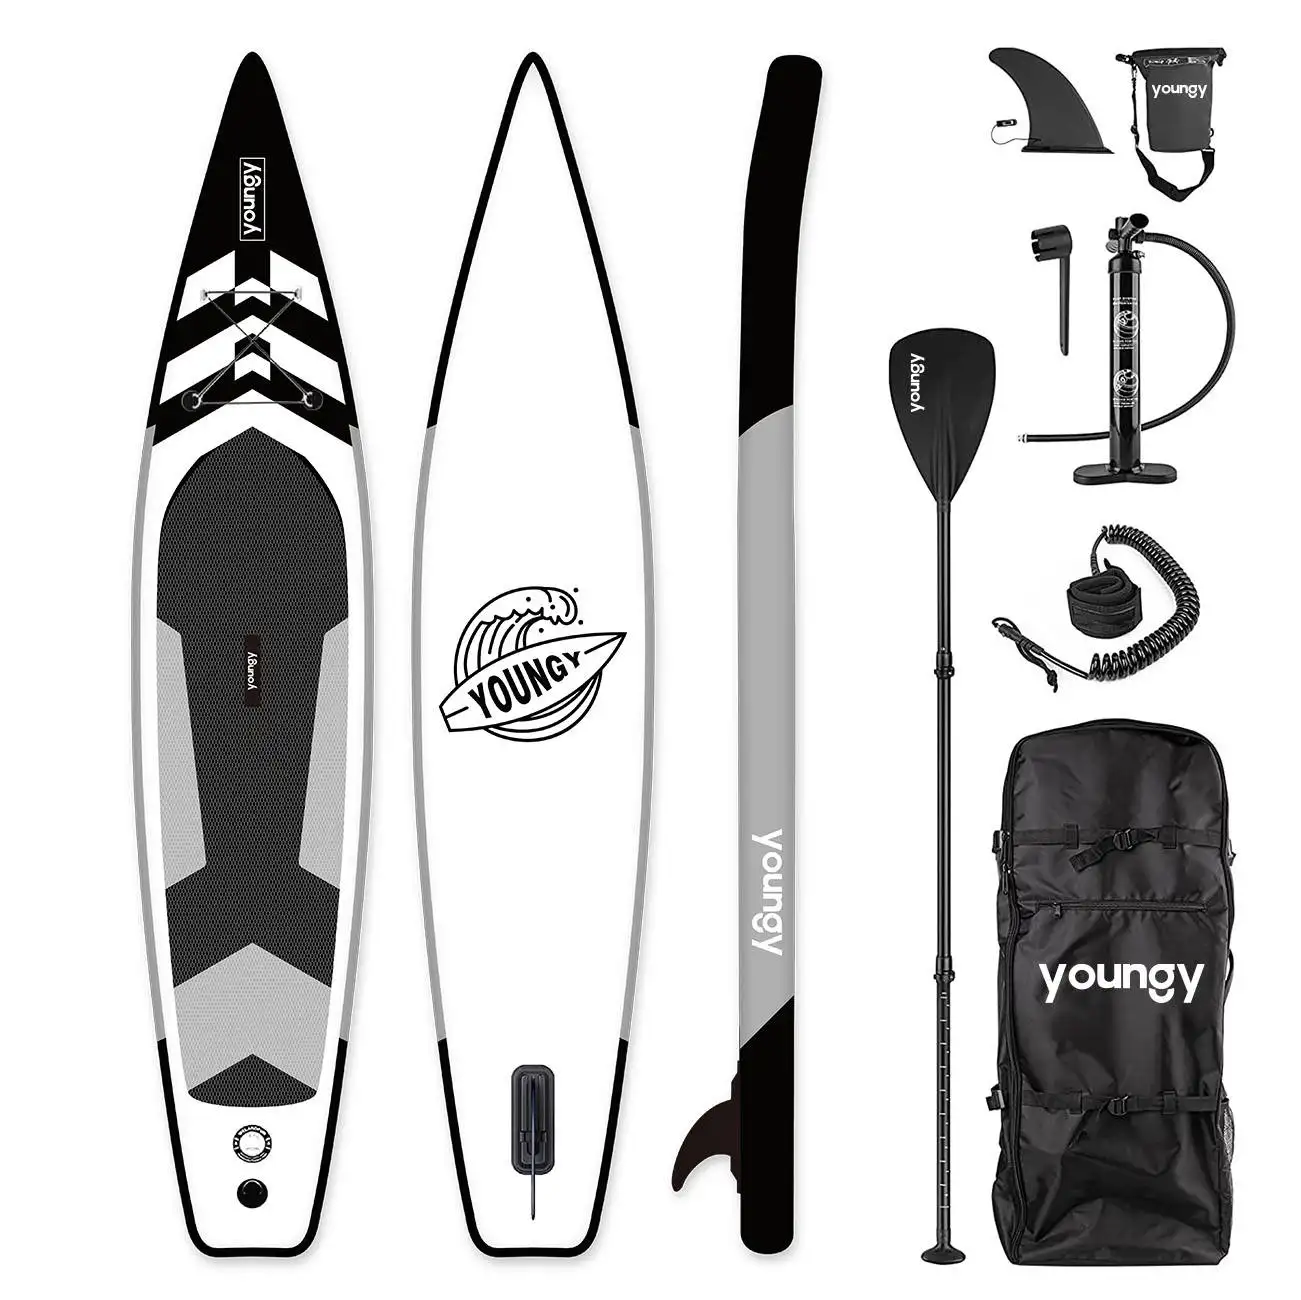 Longboard Surfboard New Arrival Stand up Paddle Board Inflatable Sup Surf Board Isup Board for Fishing Floating Yoga Mat